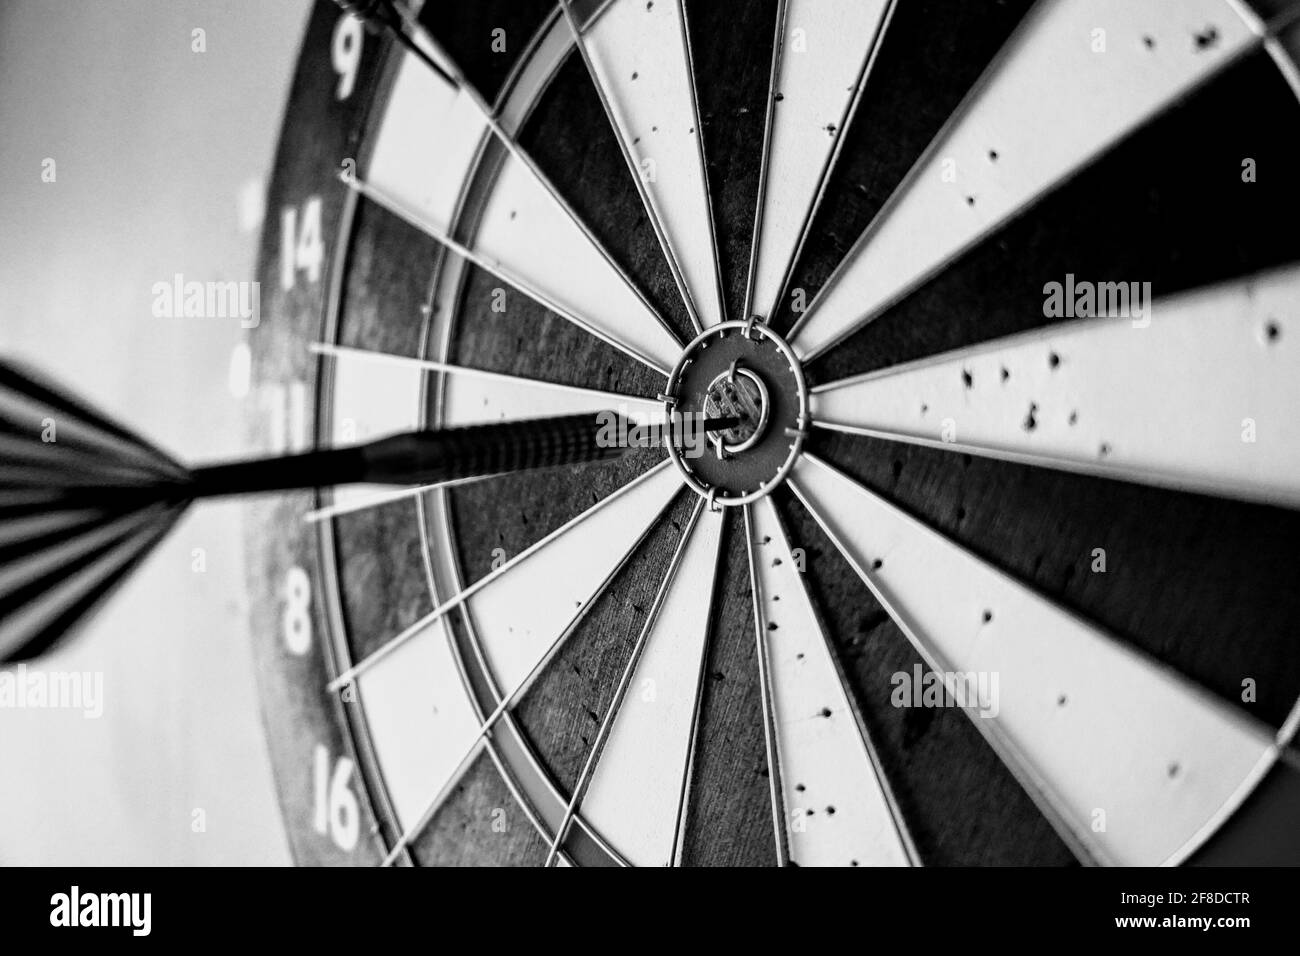 Grayscale shot of a dart hit the target Stock Photo